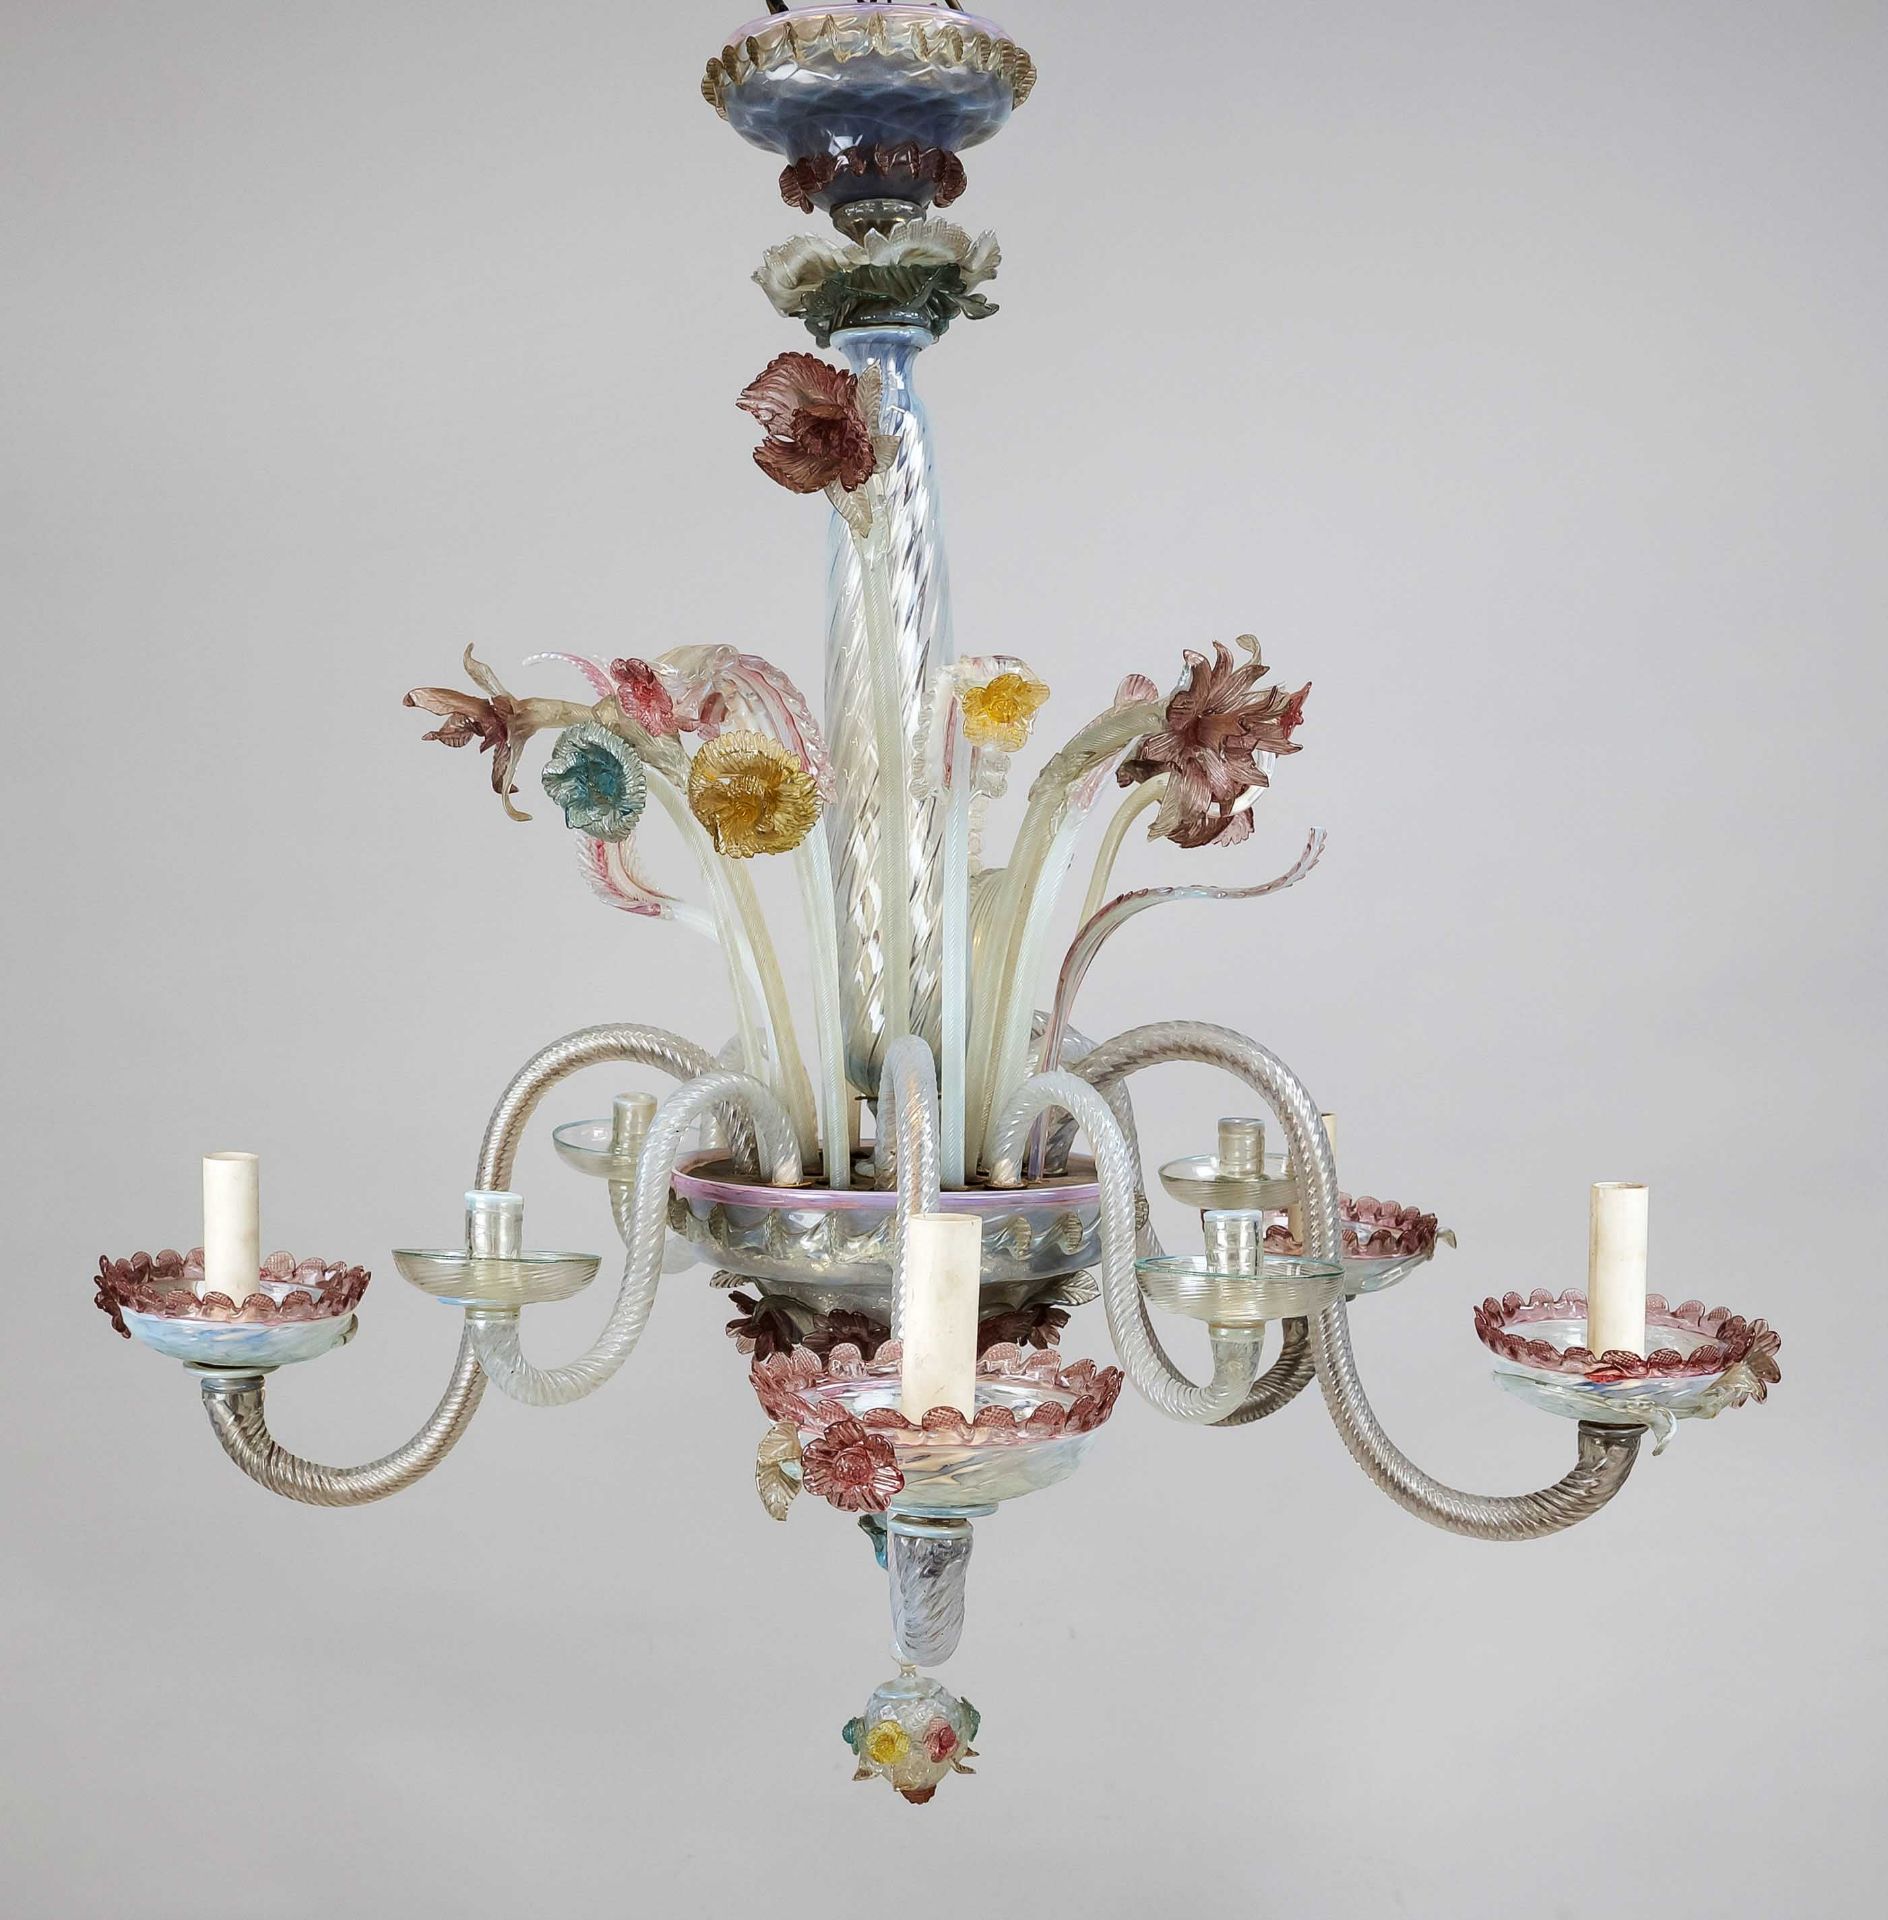 Murano ceiling lamp, Italy, mid-20th c., lavishly balustrated center console with 4 large and 4